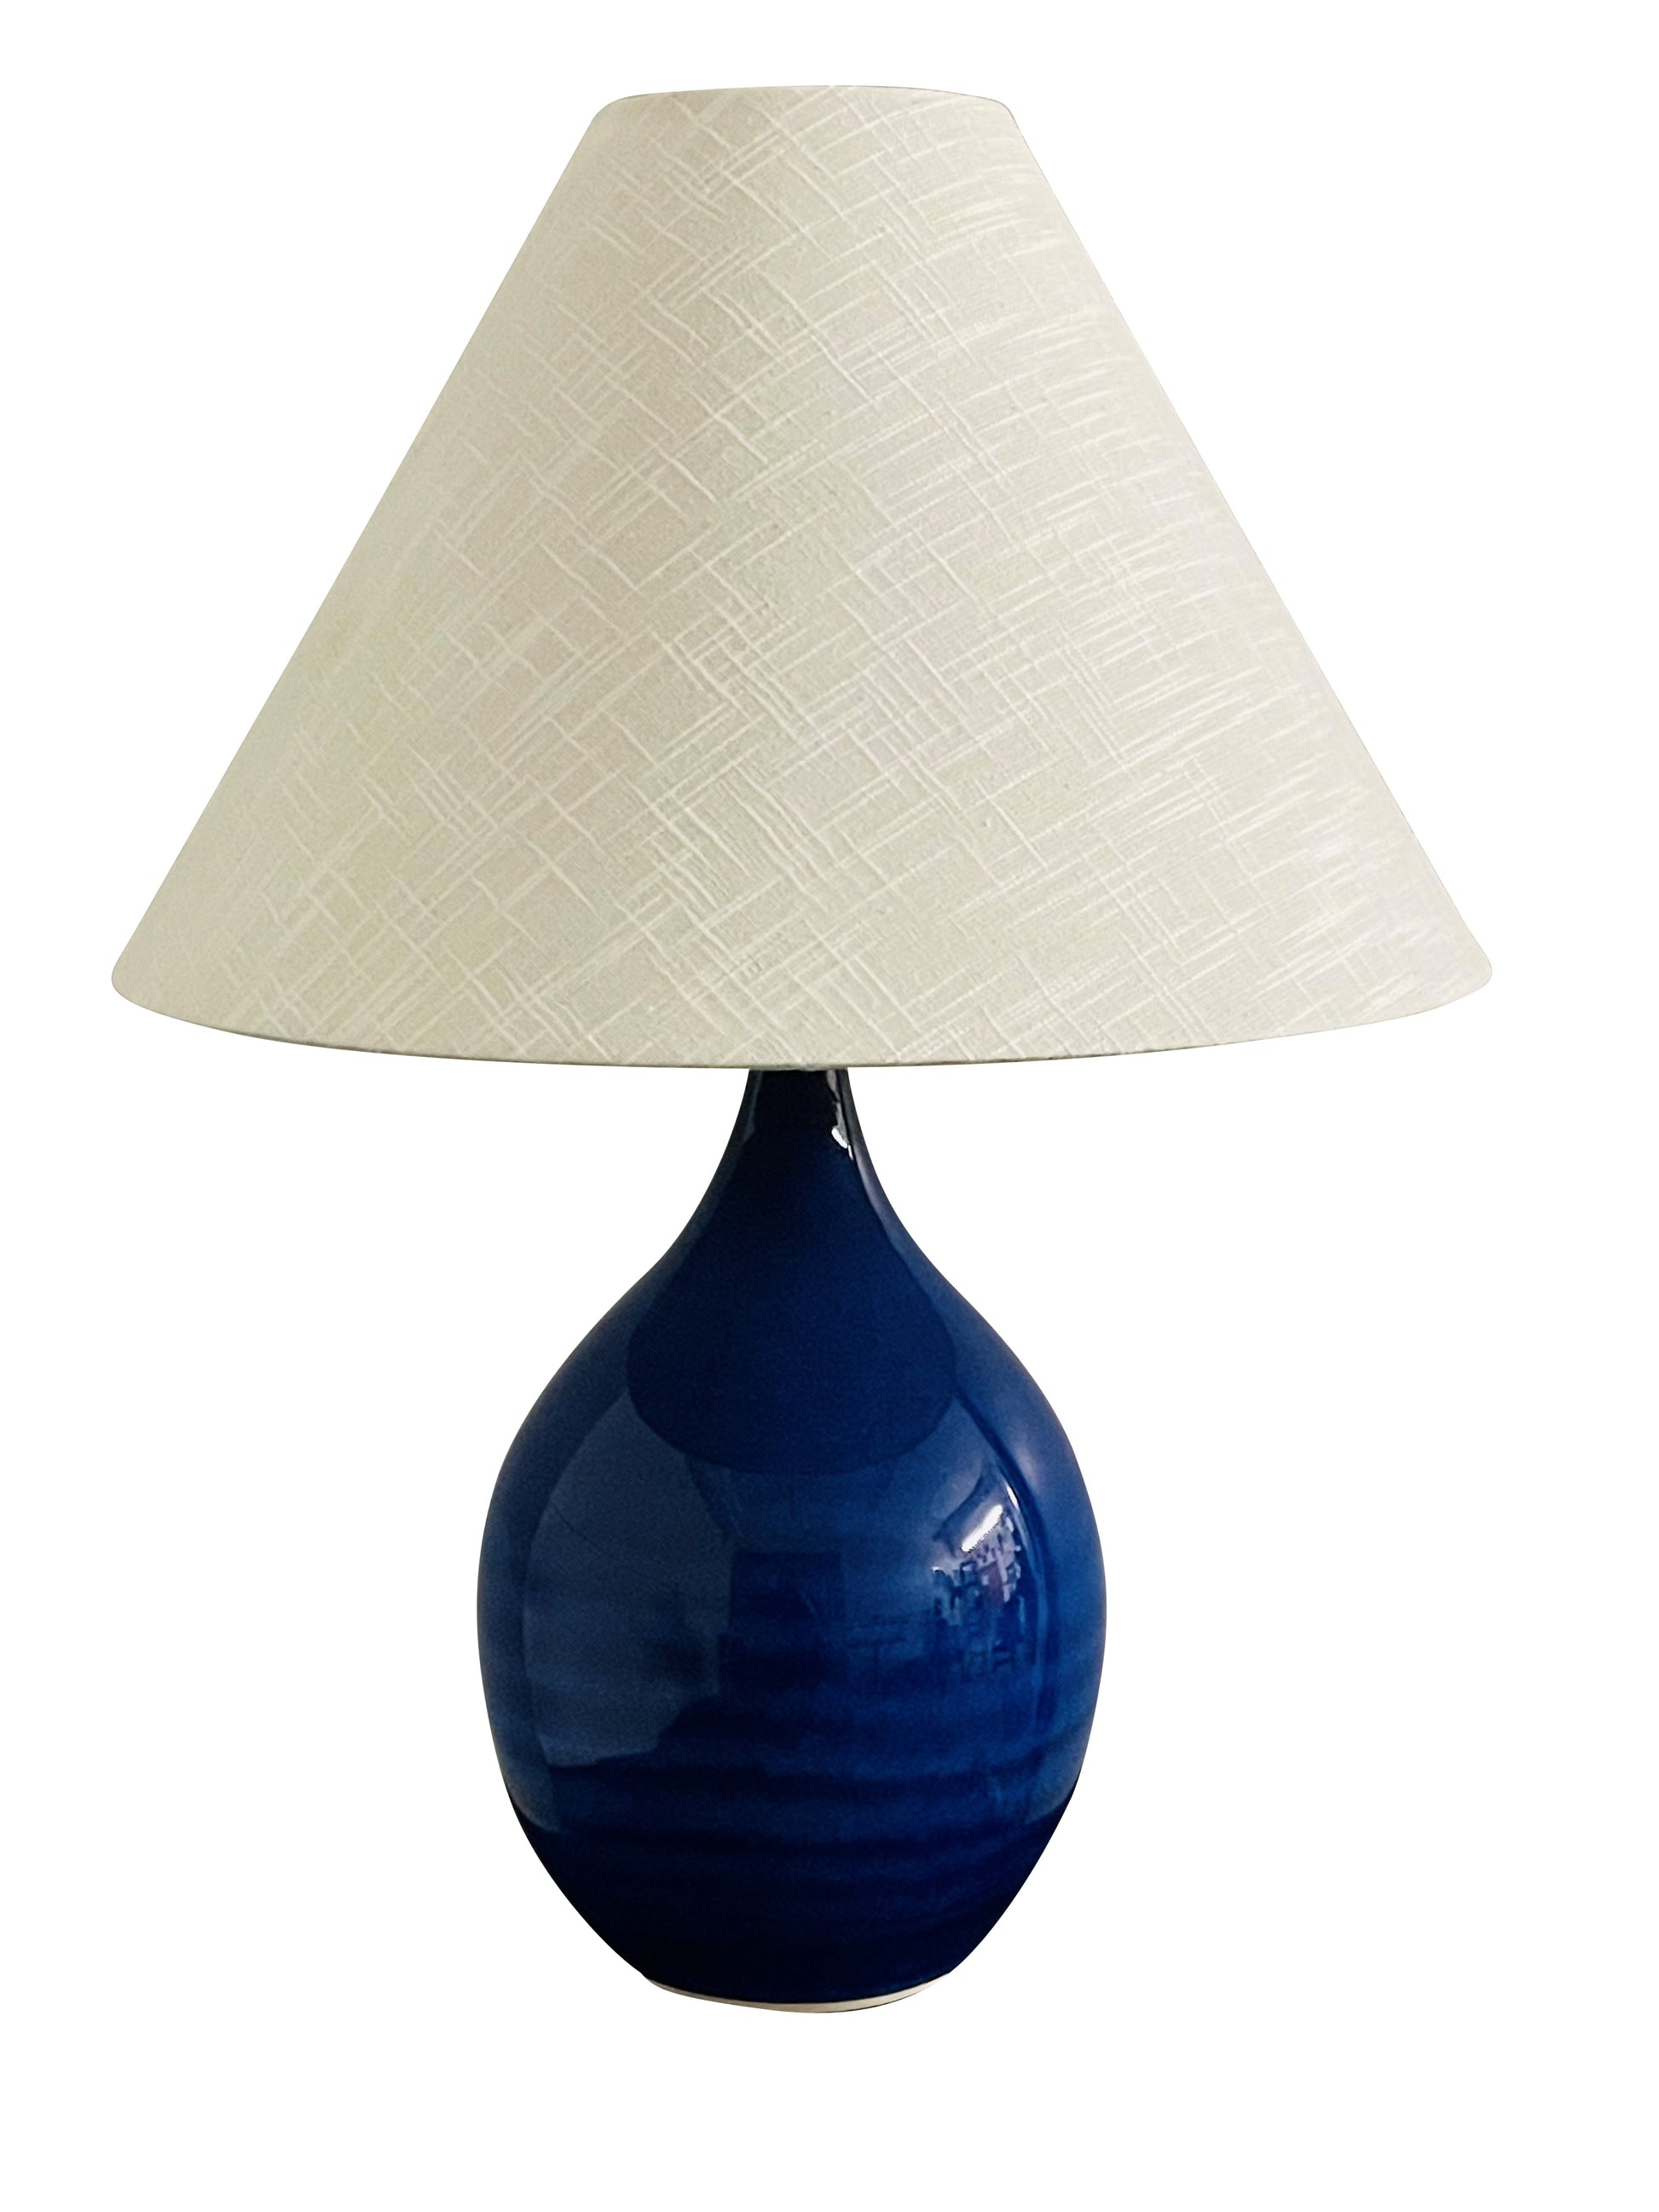 House of Troy Scatchard 22.5" Stoneware Accent Lamp in Imperial Blue GS300-IMB